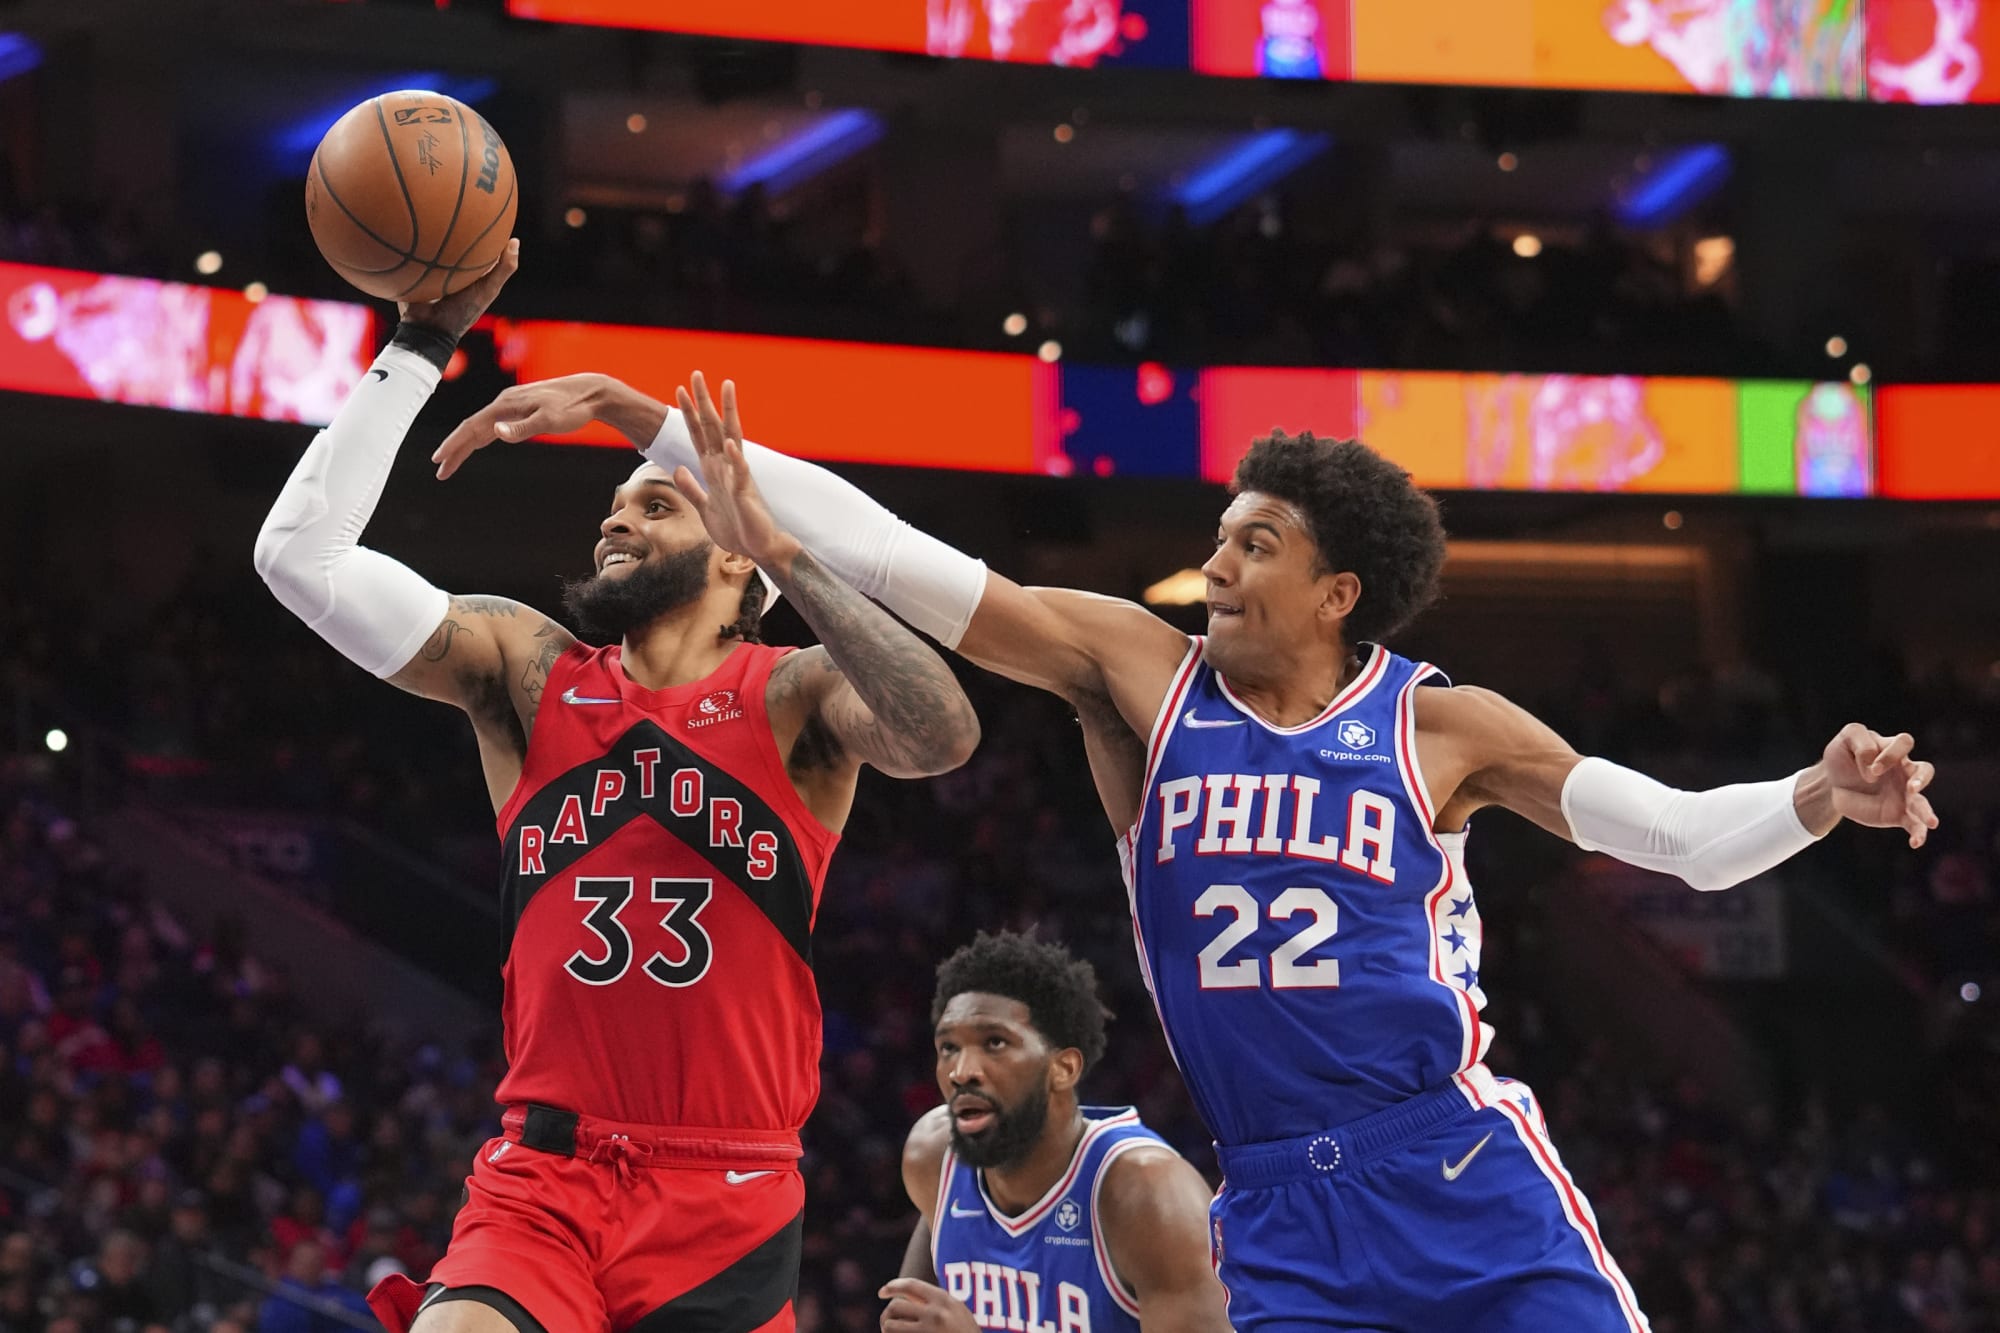 Should the Raptors consider making a change to the starting lineup?